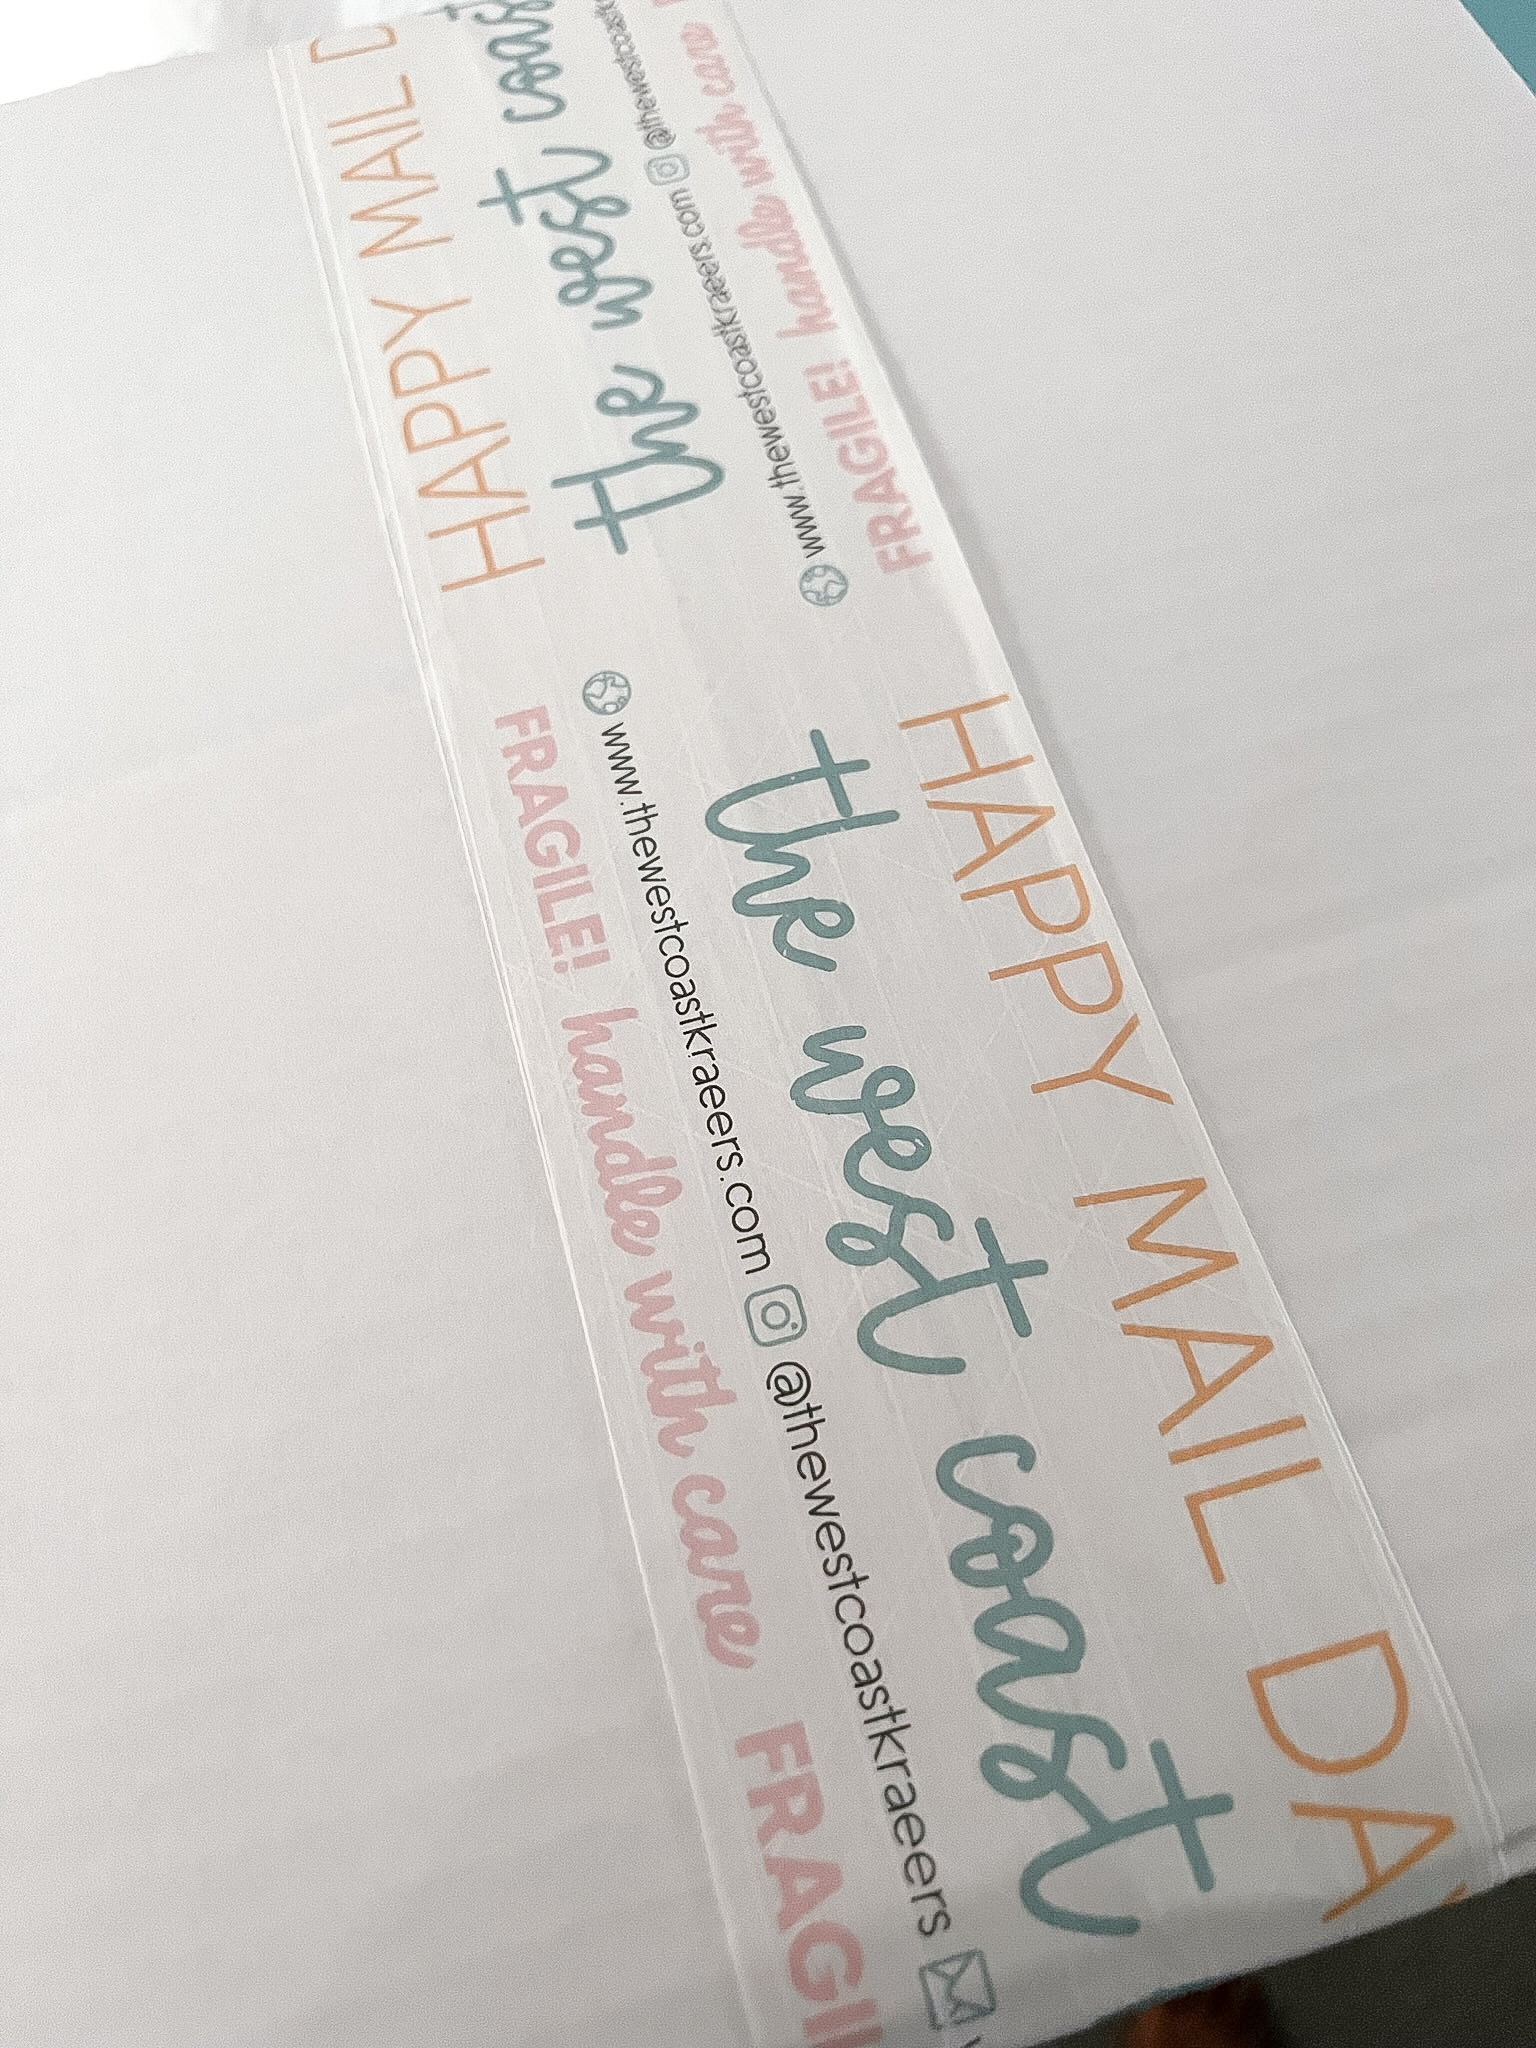 Multi-Trans PRO on Packing Tape made with sublimation printing